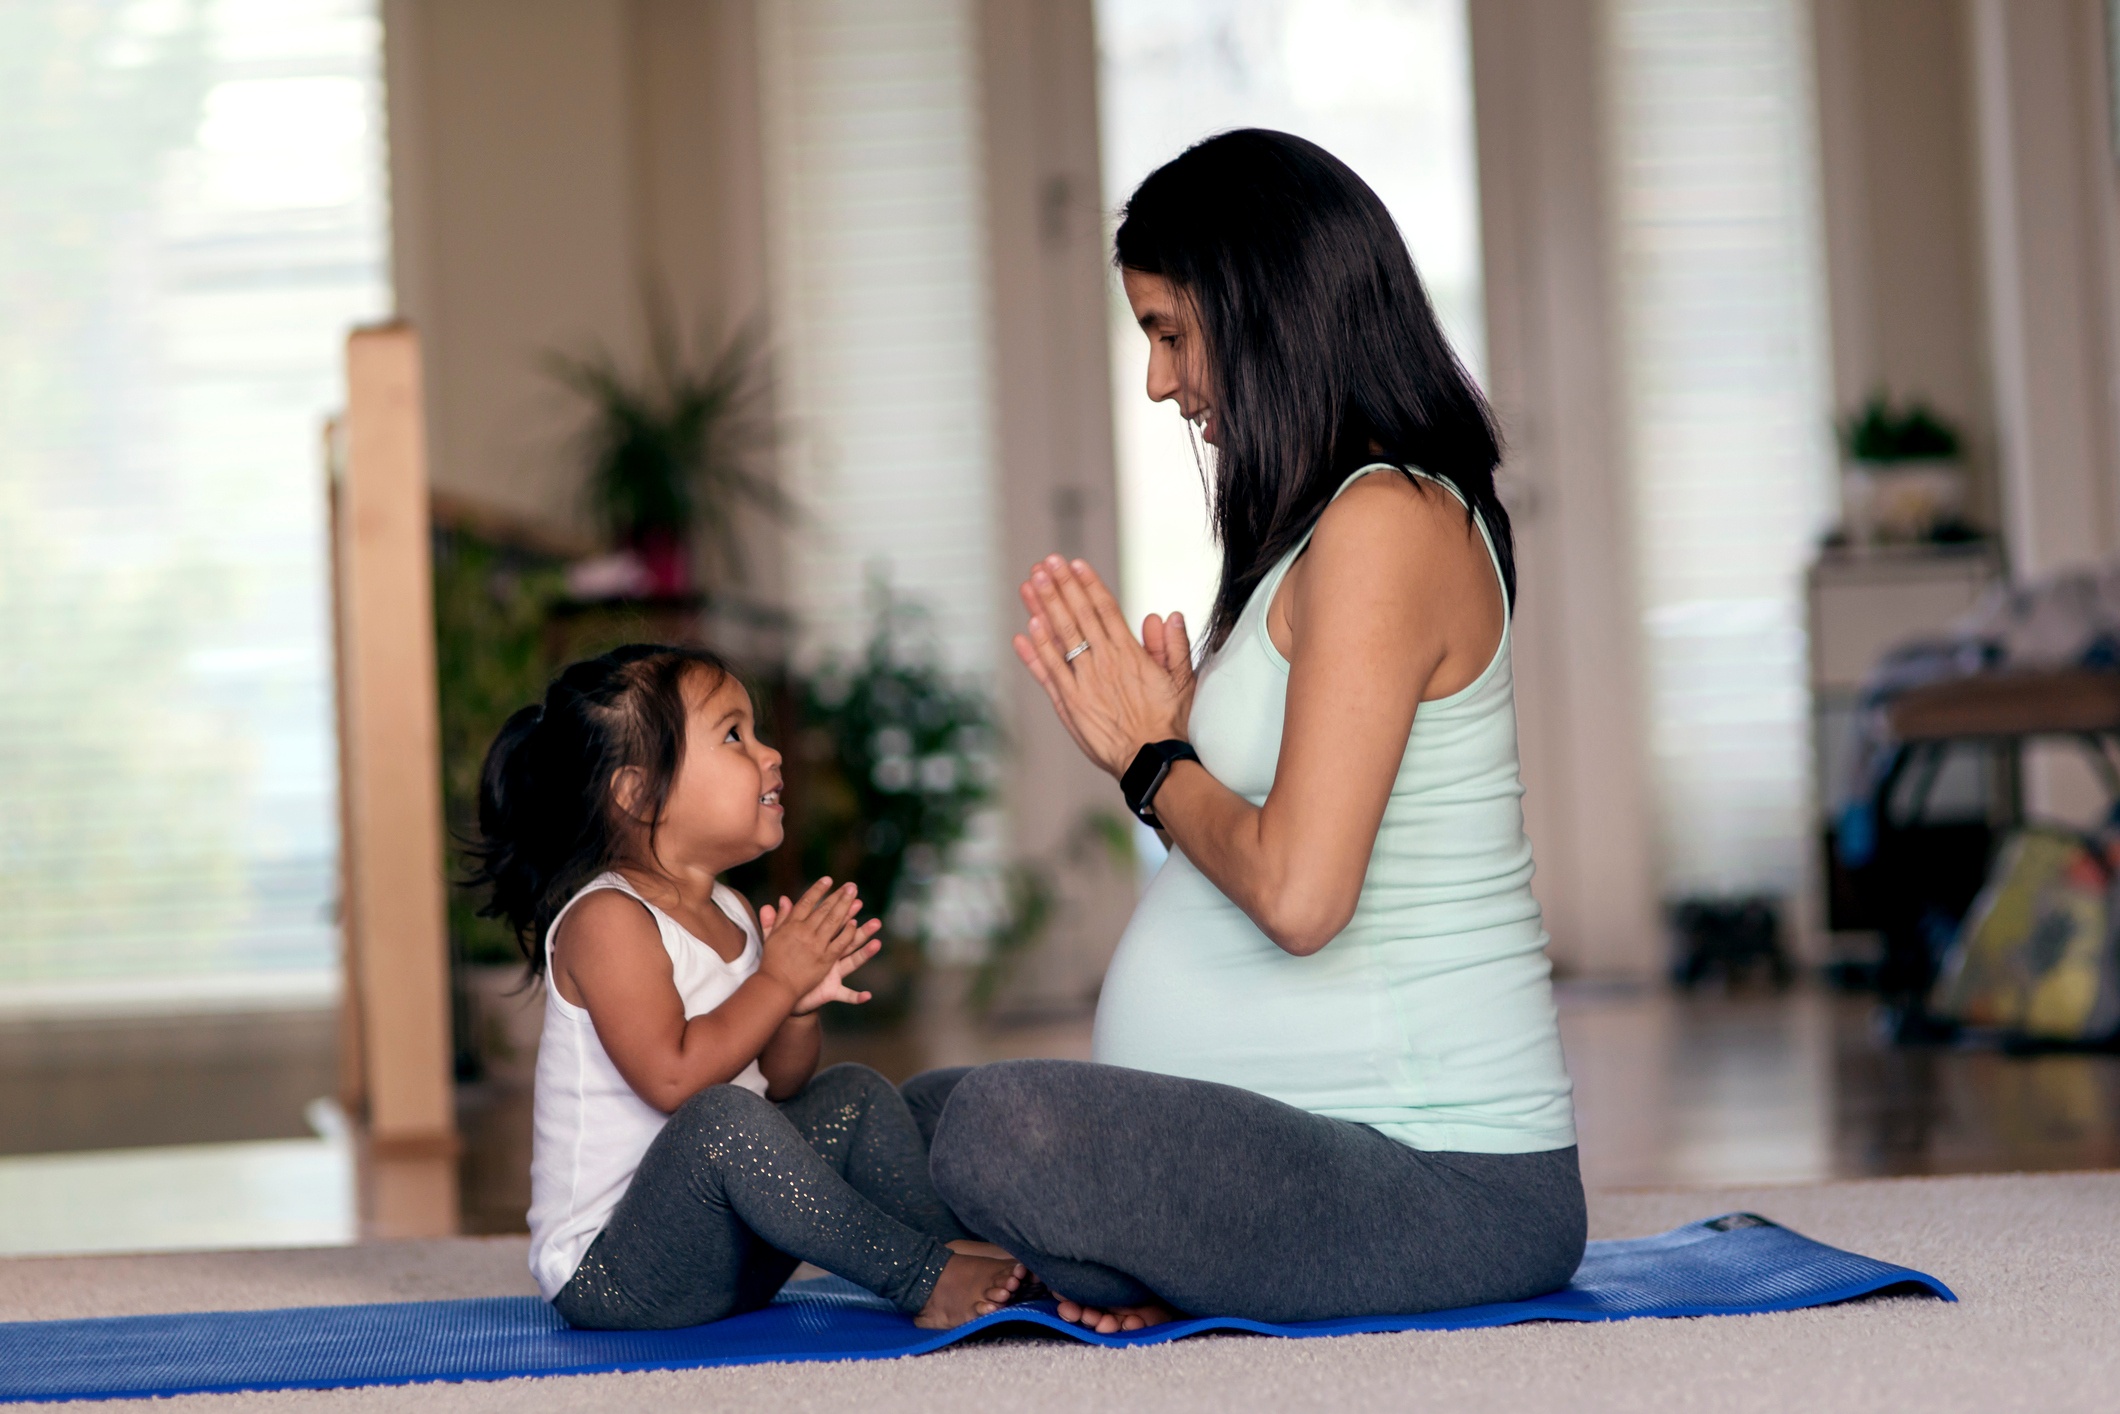 A mother and her 4-year-old daughter meditating together on a blue yoga mat.